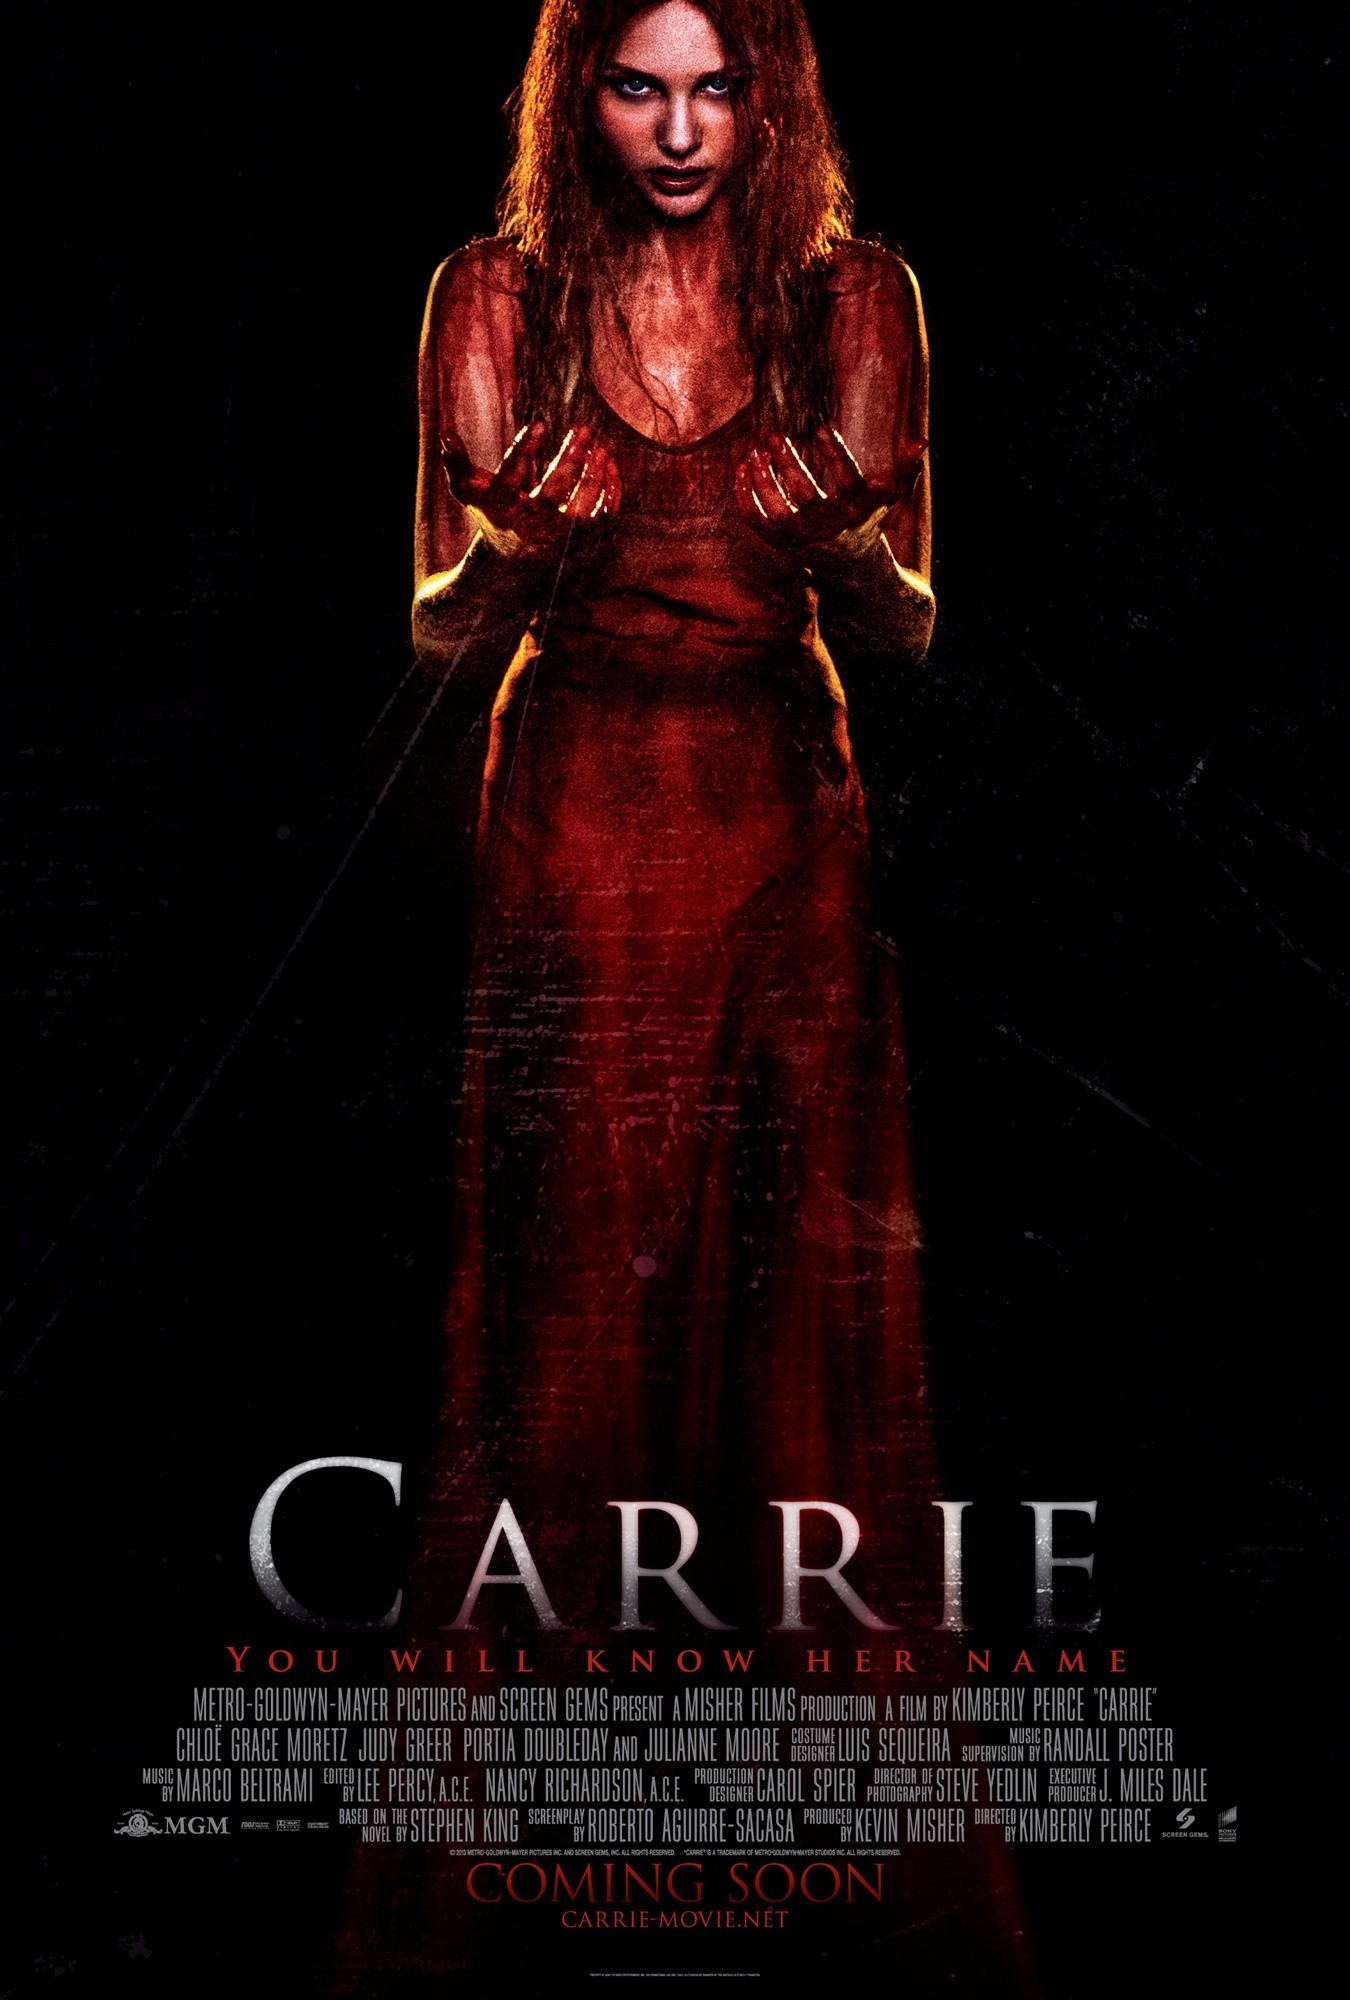 The Enduring Menstrual Mystique of Carrie